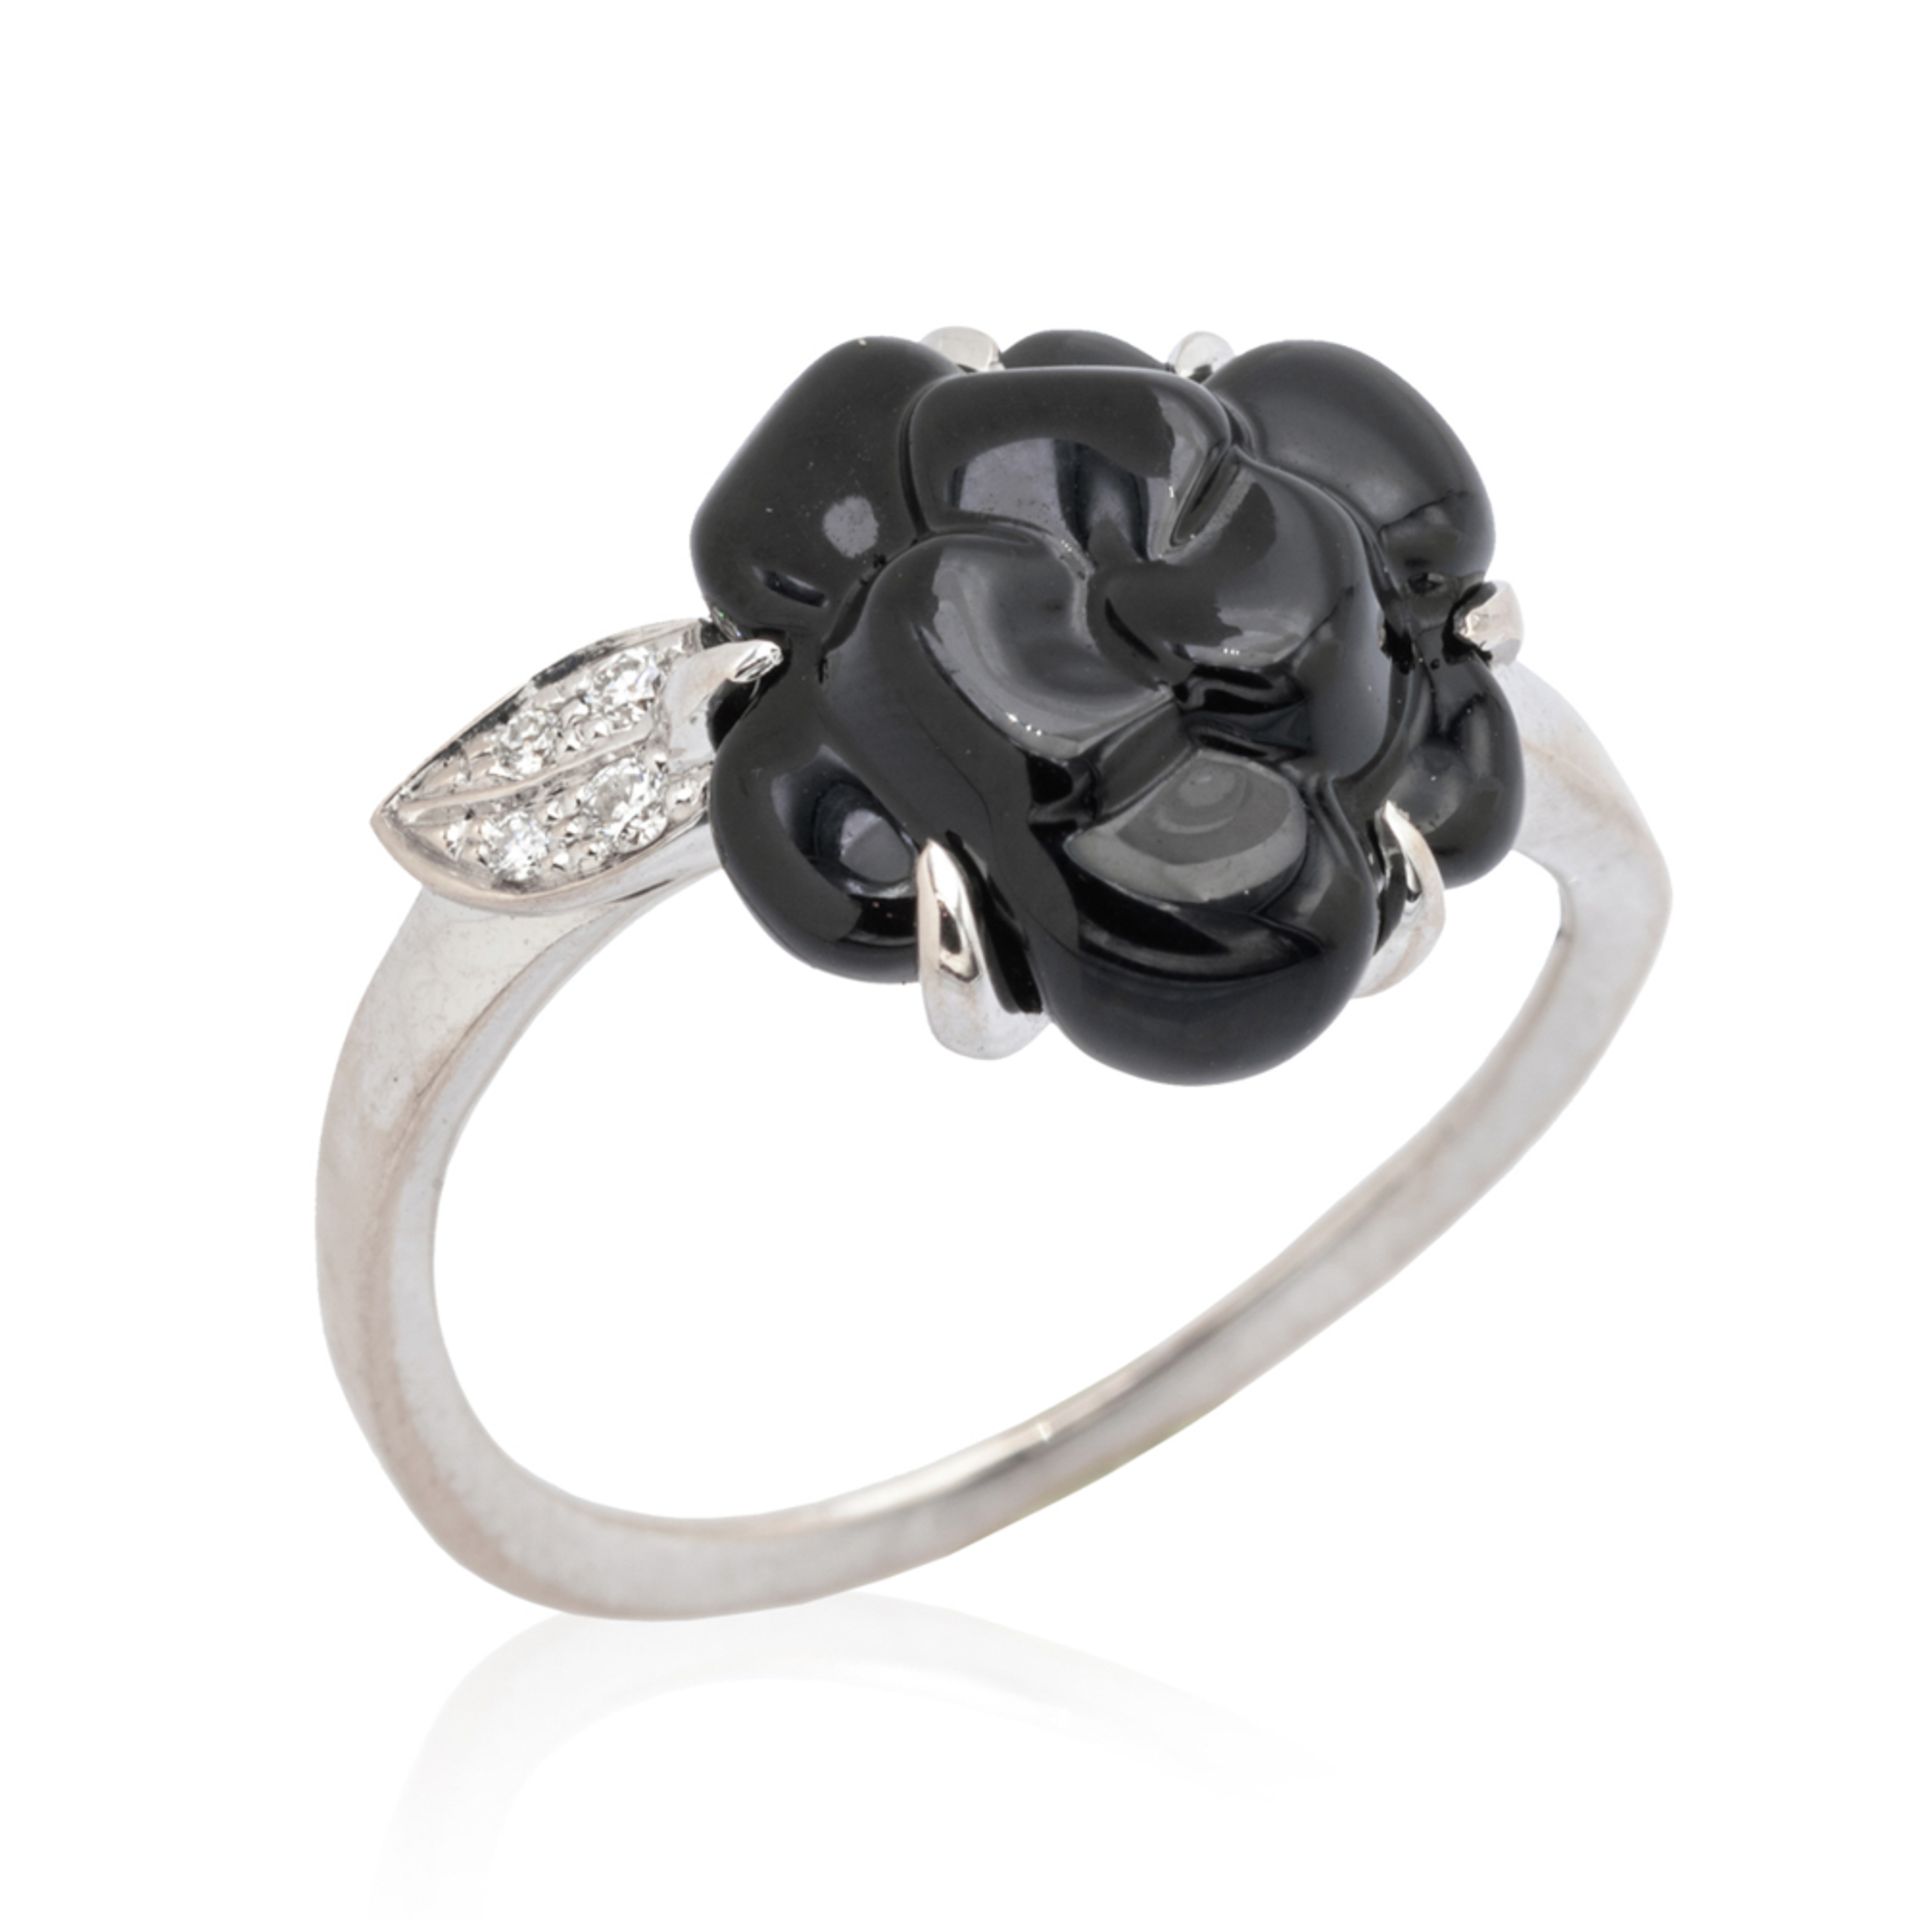 Chanel, Camelia collection ring